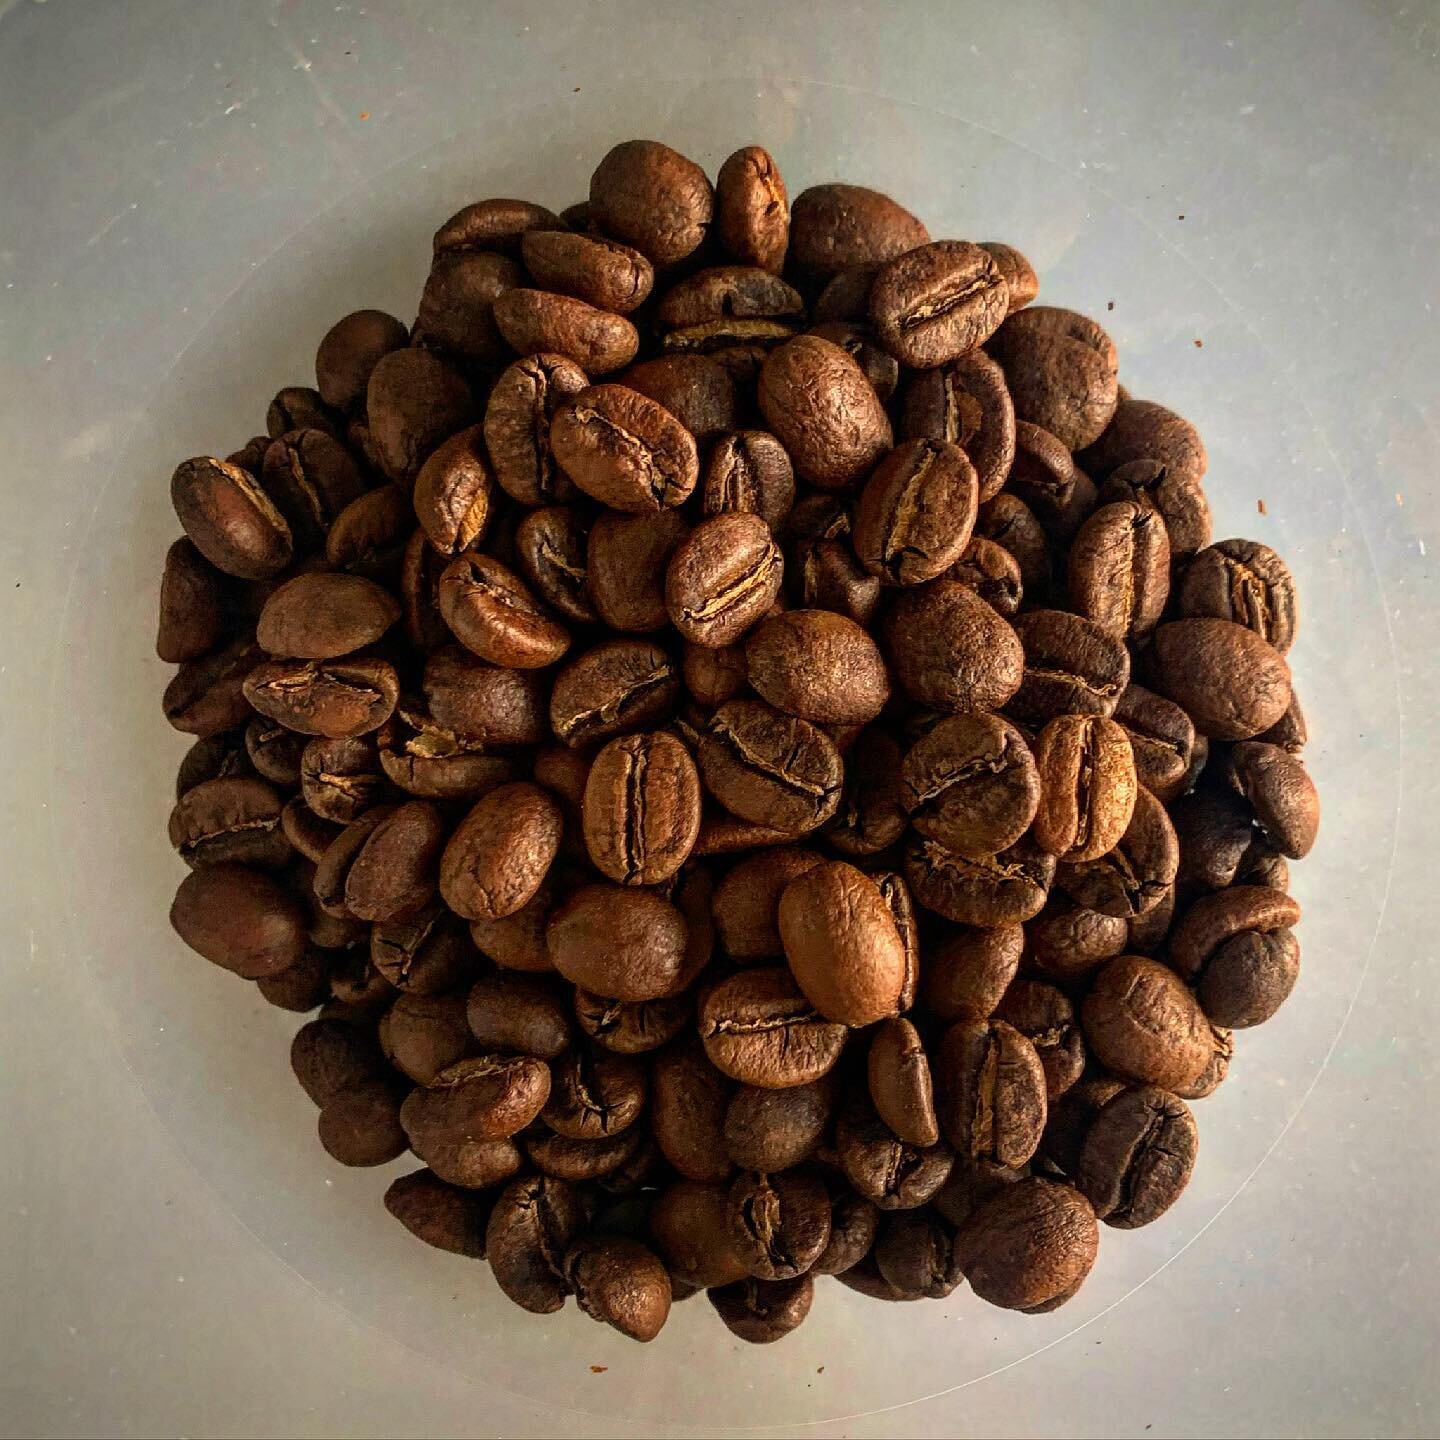 quotidian ritual: coffee.

what flavors do you taste first in the morning?

&mdash;

some say I take it too seriously, 
that it is &ldquo;fancy&rdquo; the way I make coffee.

true truth is it is just coffee, water, heat, and time, with a heck of a lo